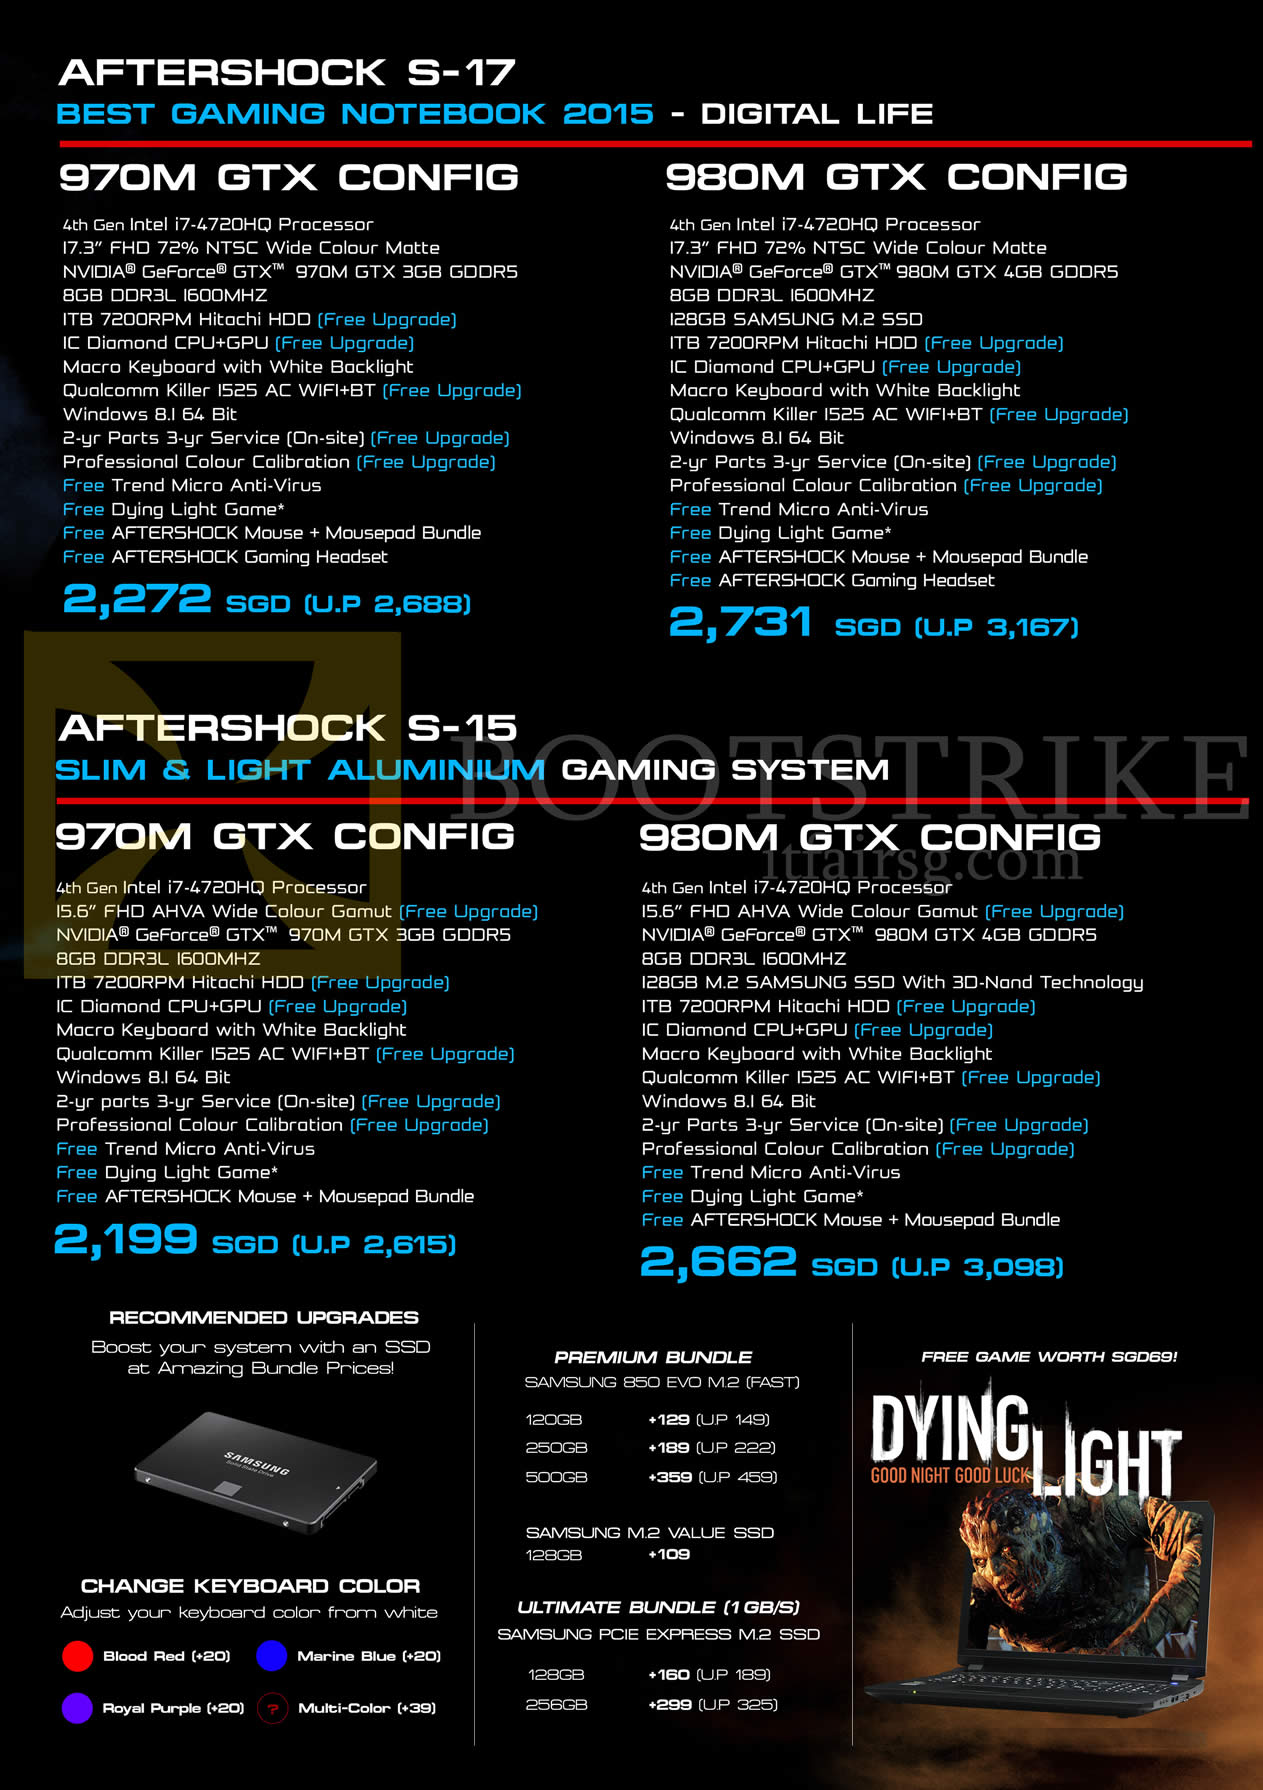 IT SHOW 2015 price list image brochure of Aftershock Notebooks S-17, S-15